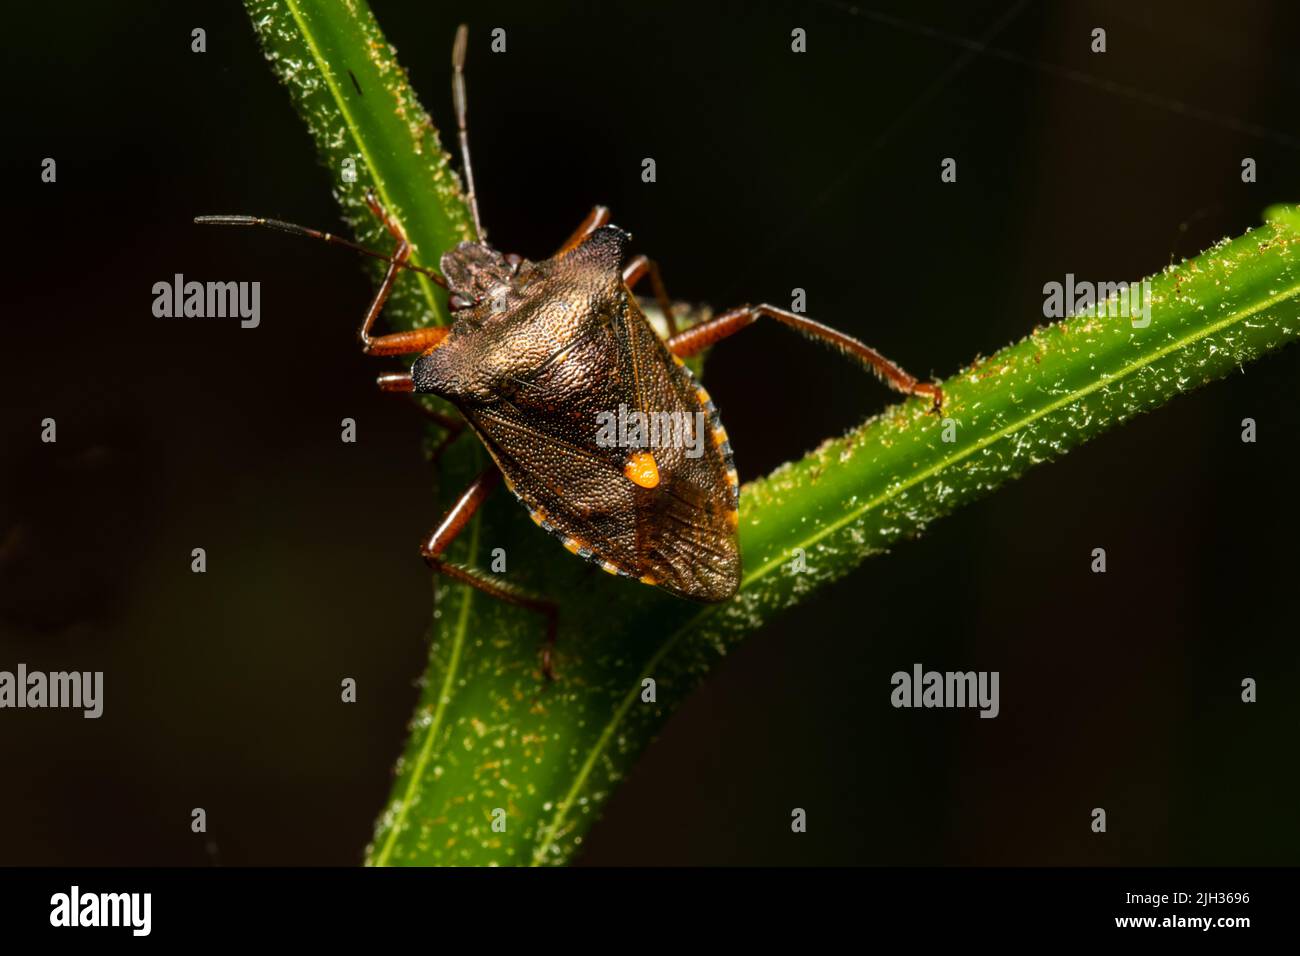 Pentatoma rufipes, more commonly known as the Forest bug or red-legged shieldbug, perching on a plant stem. Stock Photo